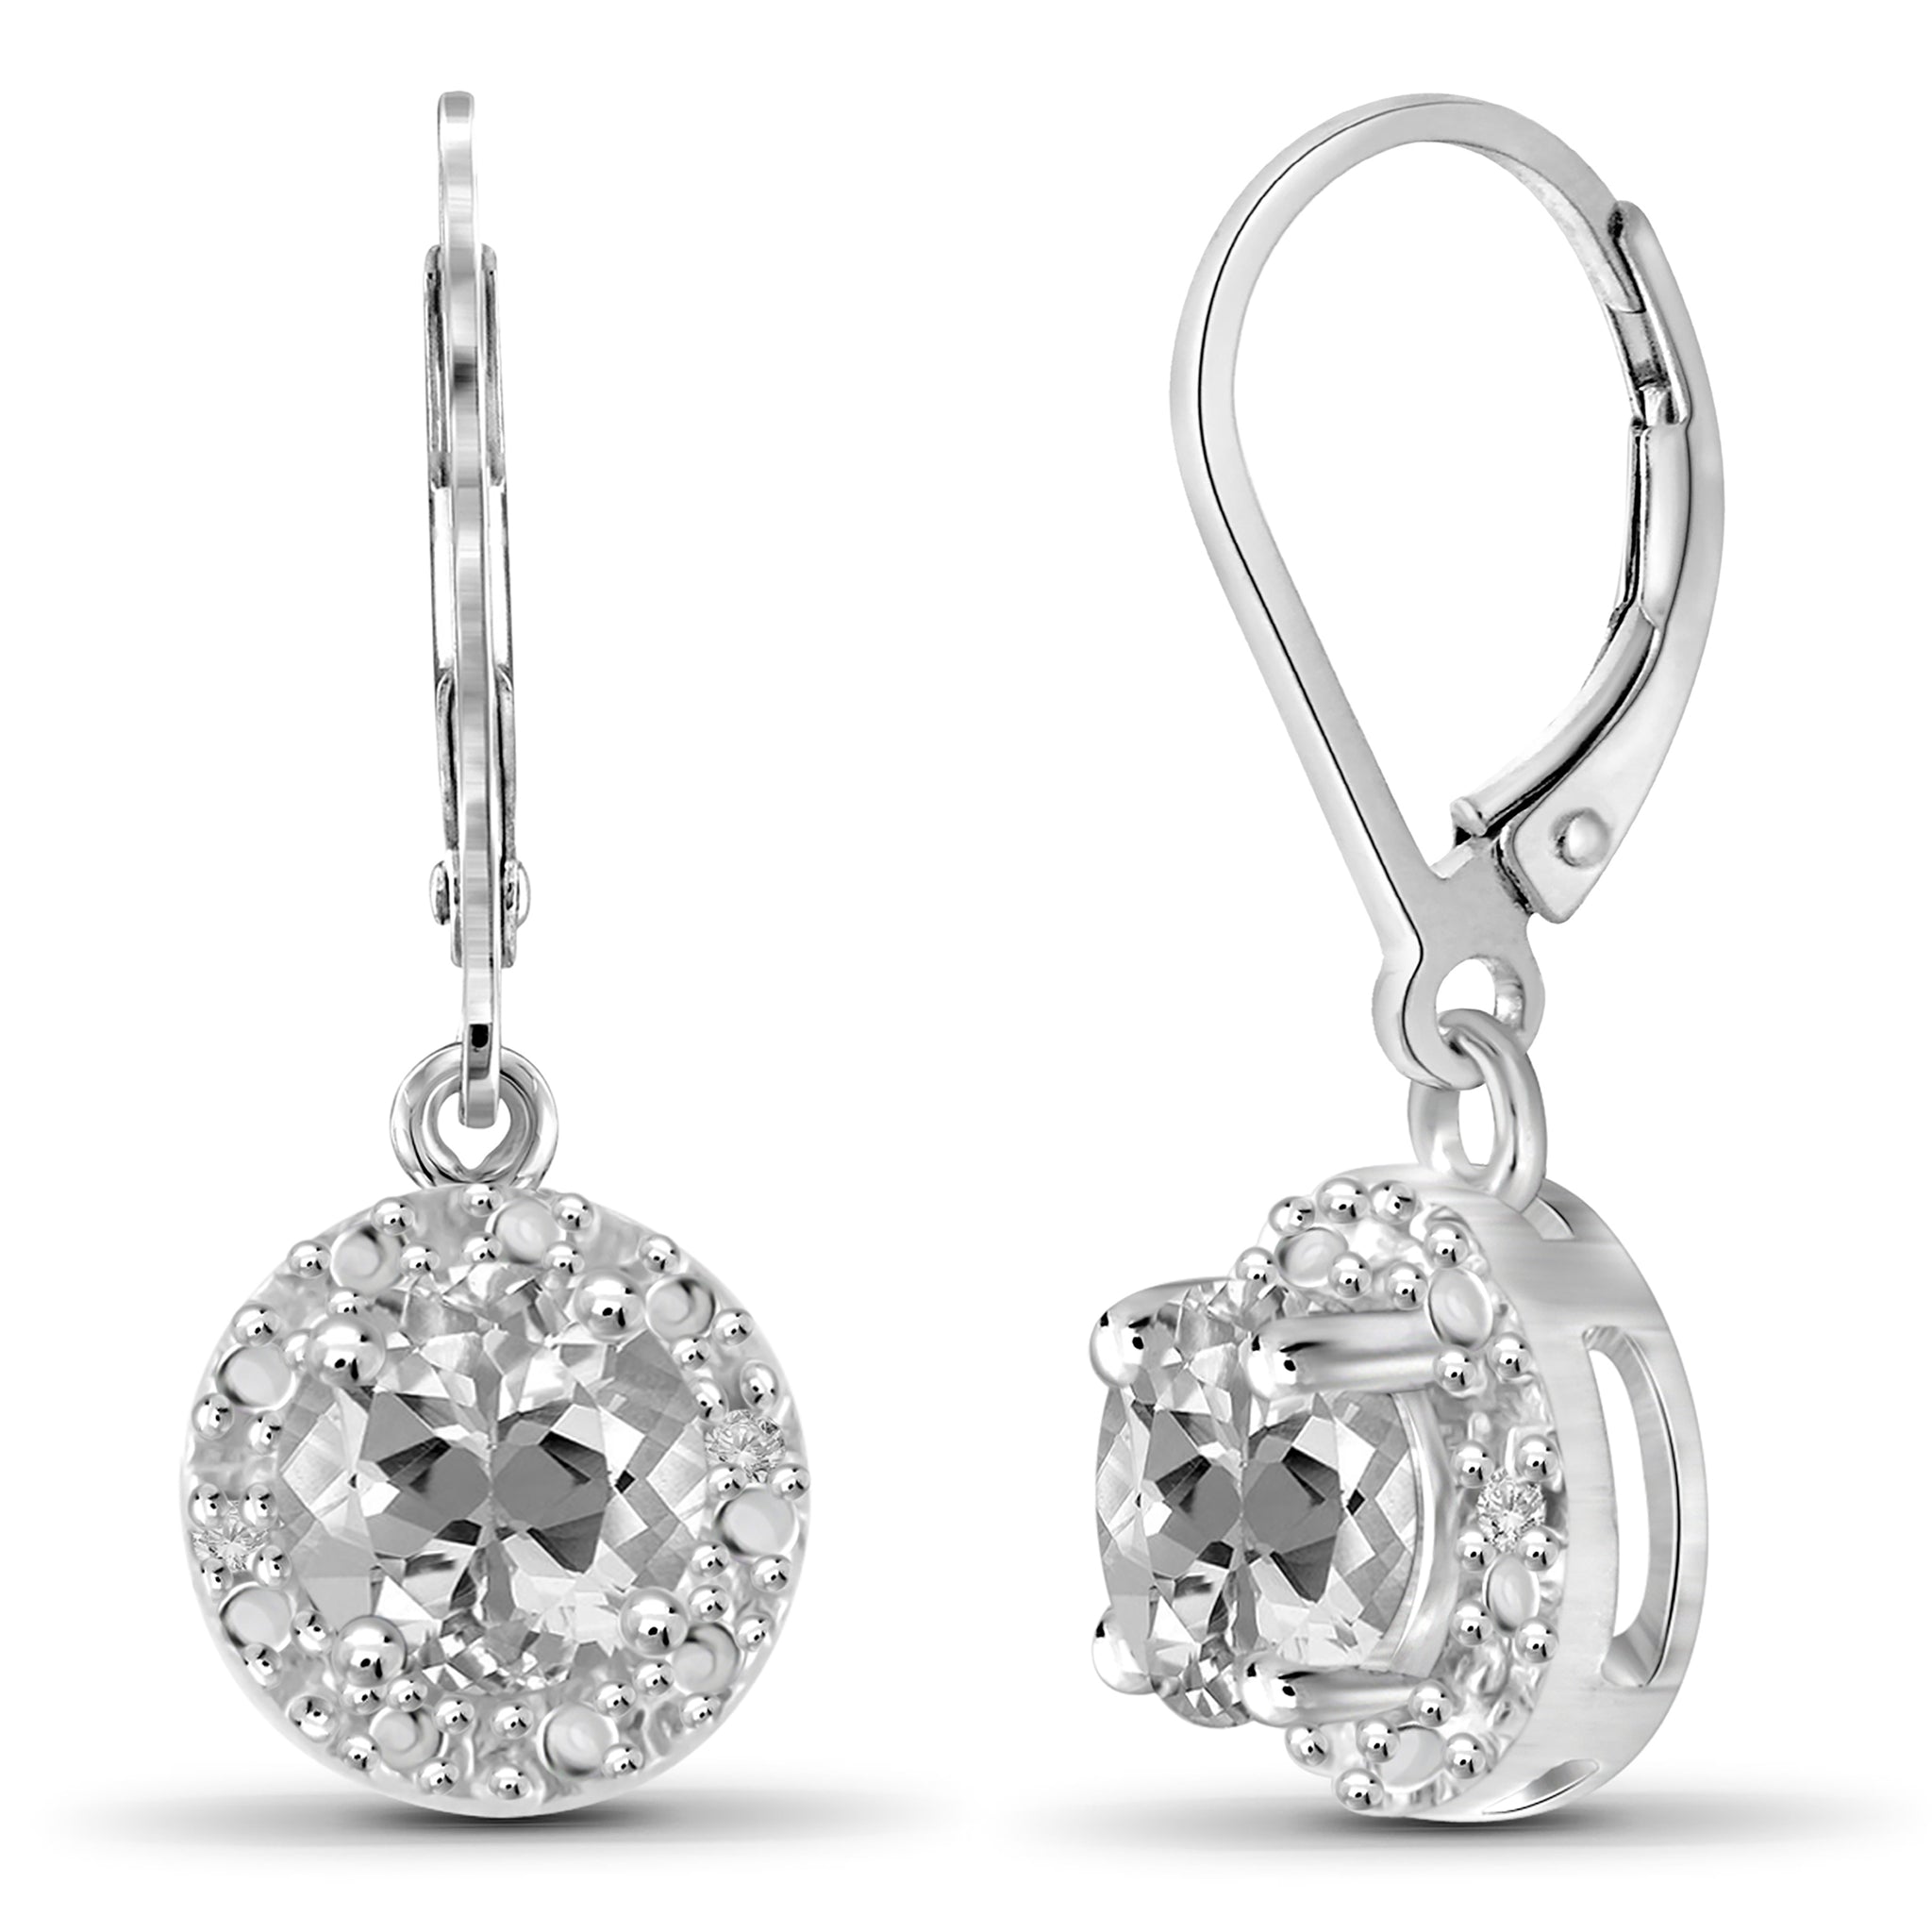 JewelonFire 1 1/4 Carat T.G.W. White Topaz and White Diamond Accent Sterling Silver Dangle Earrings - Assorted Colors